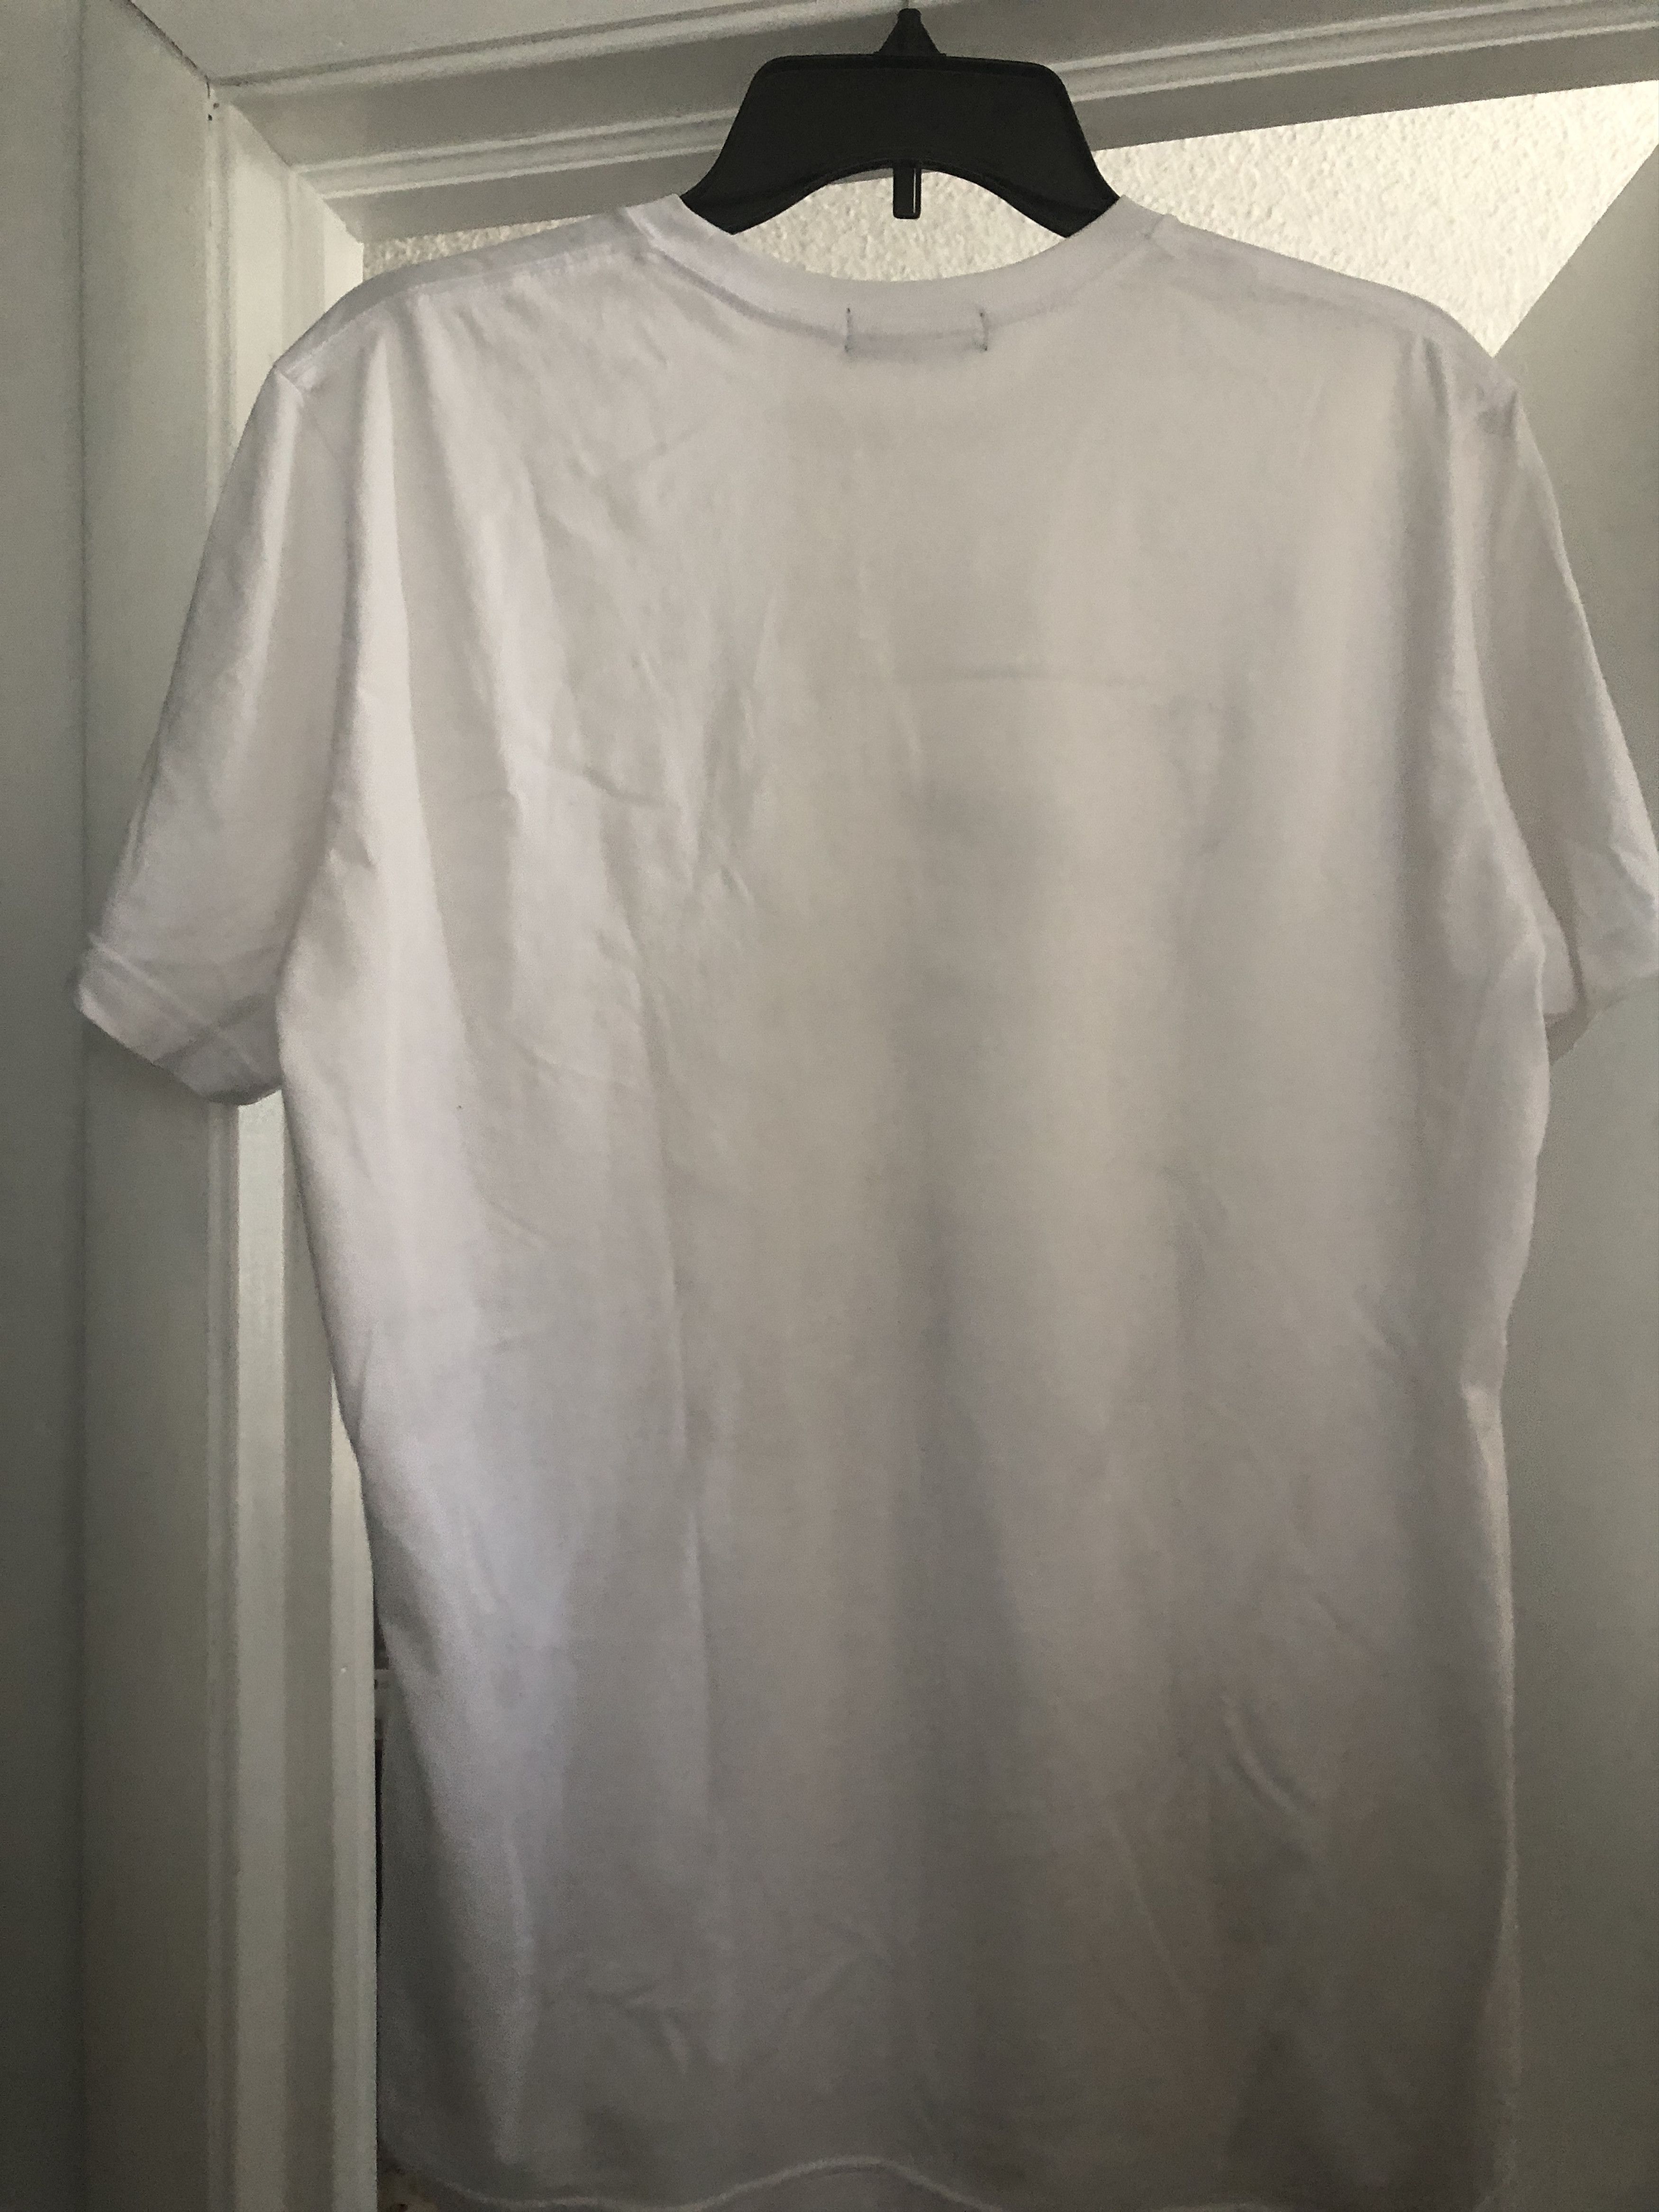 Undercover Undercover Bear Tee Size US L / EU 52-54 / 3 - 2 Preview